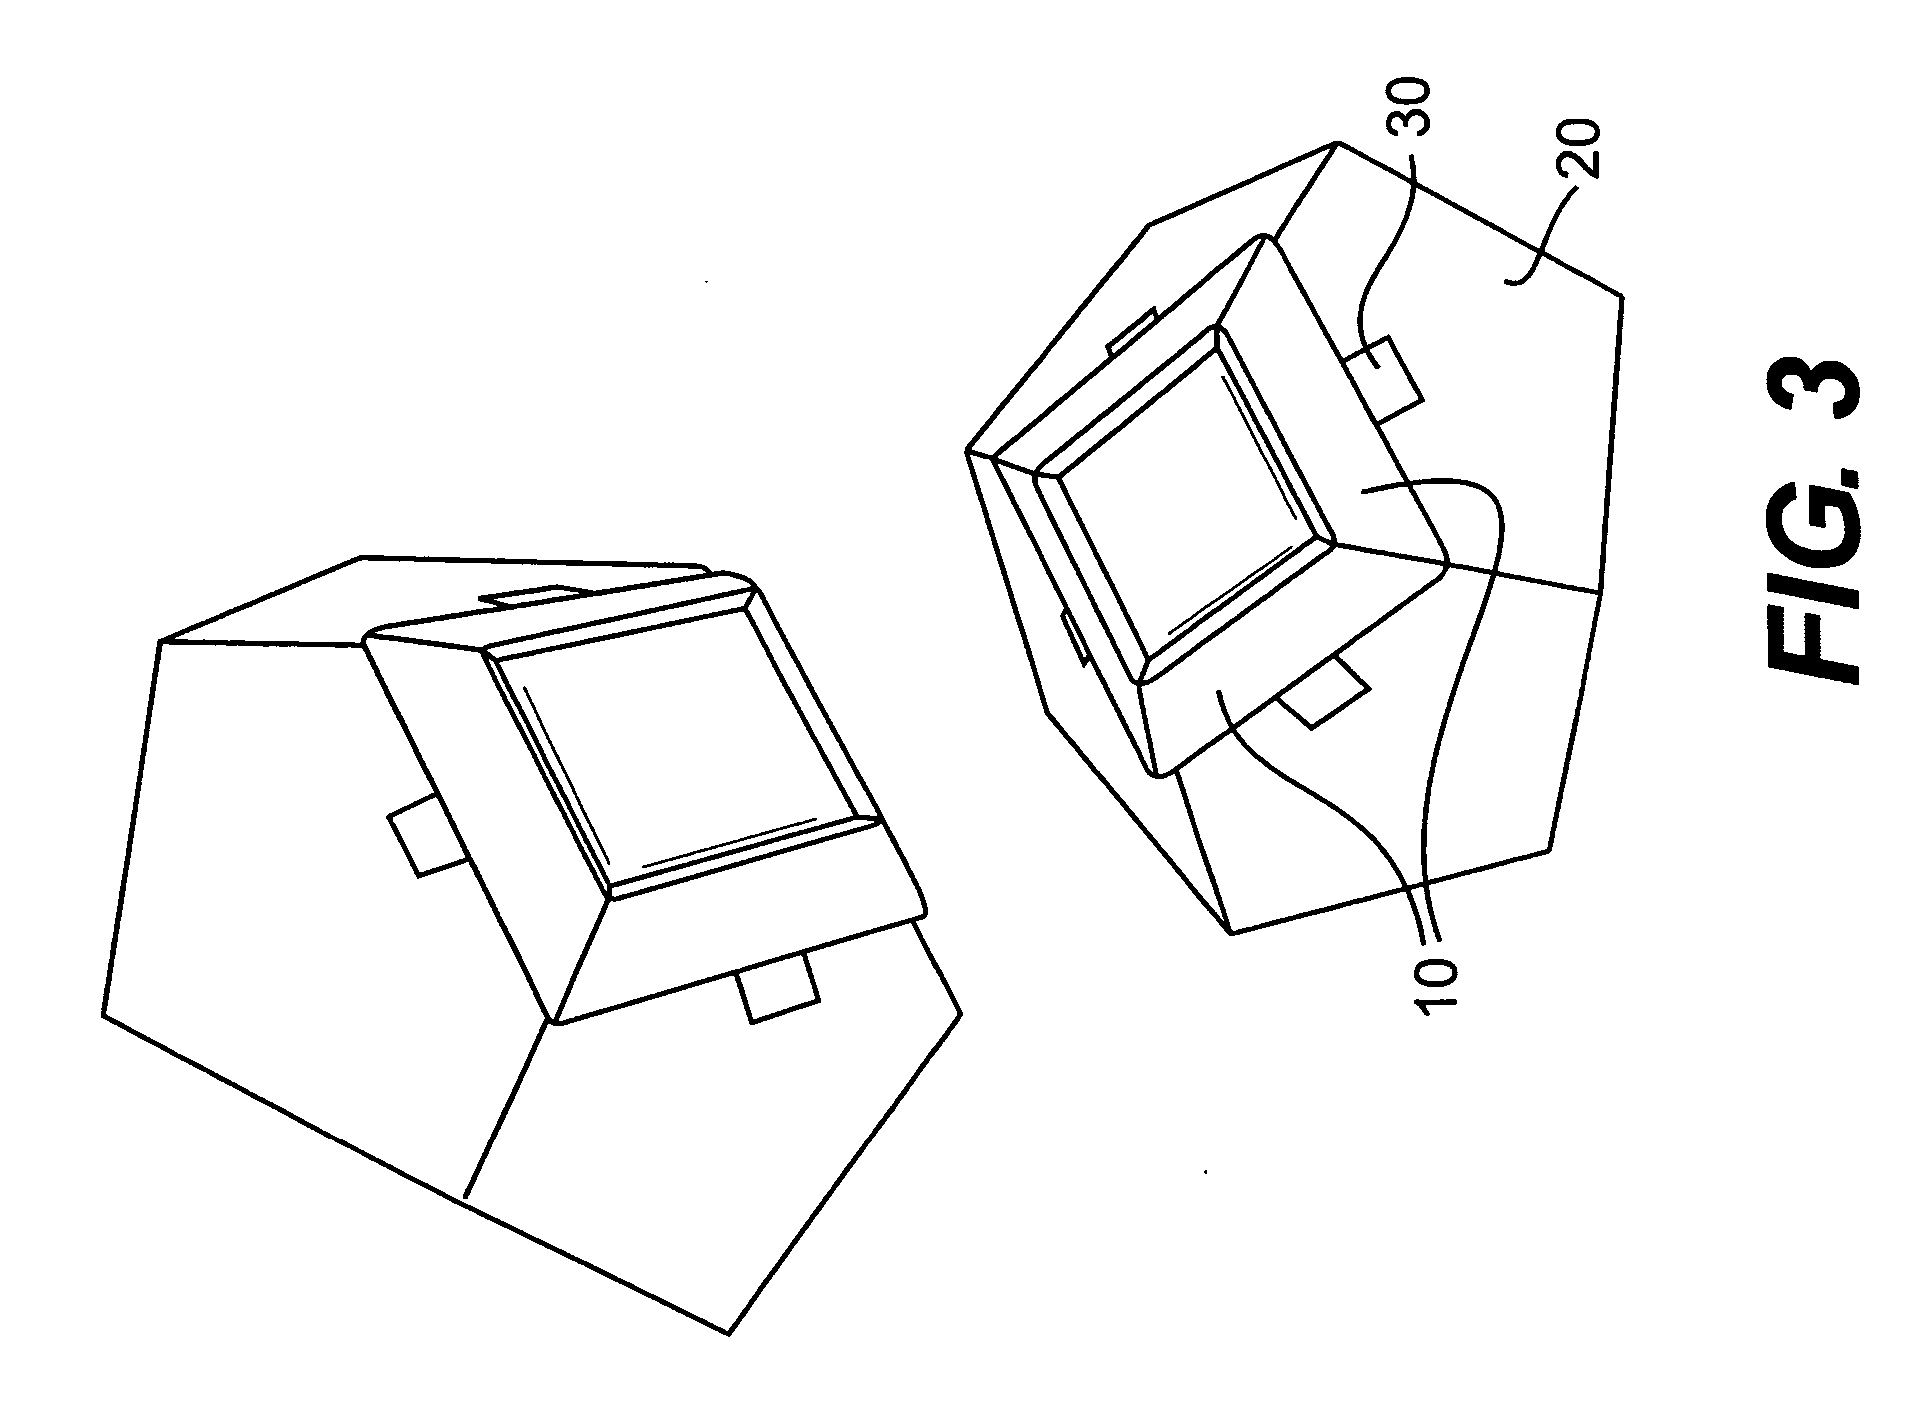 Gasket material for use in high pressure, high temperature apparatus